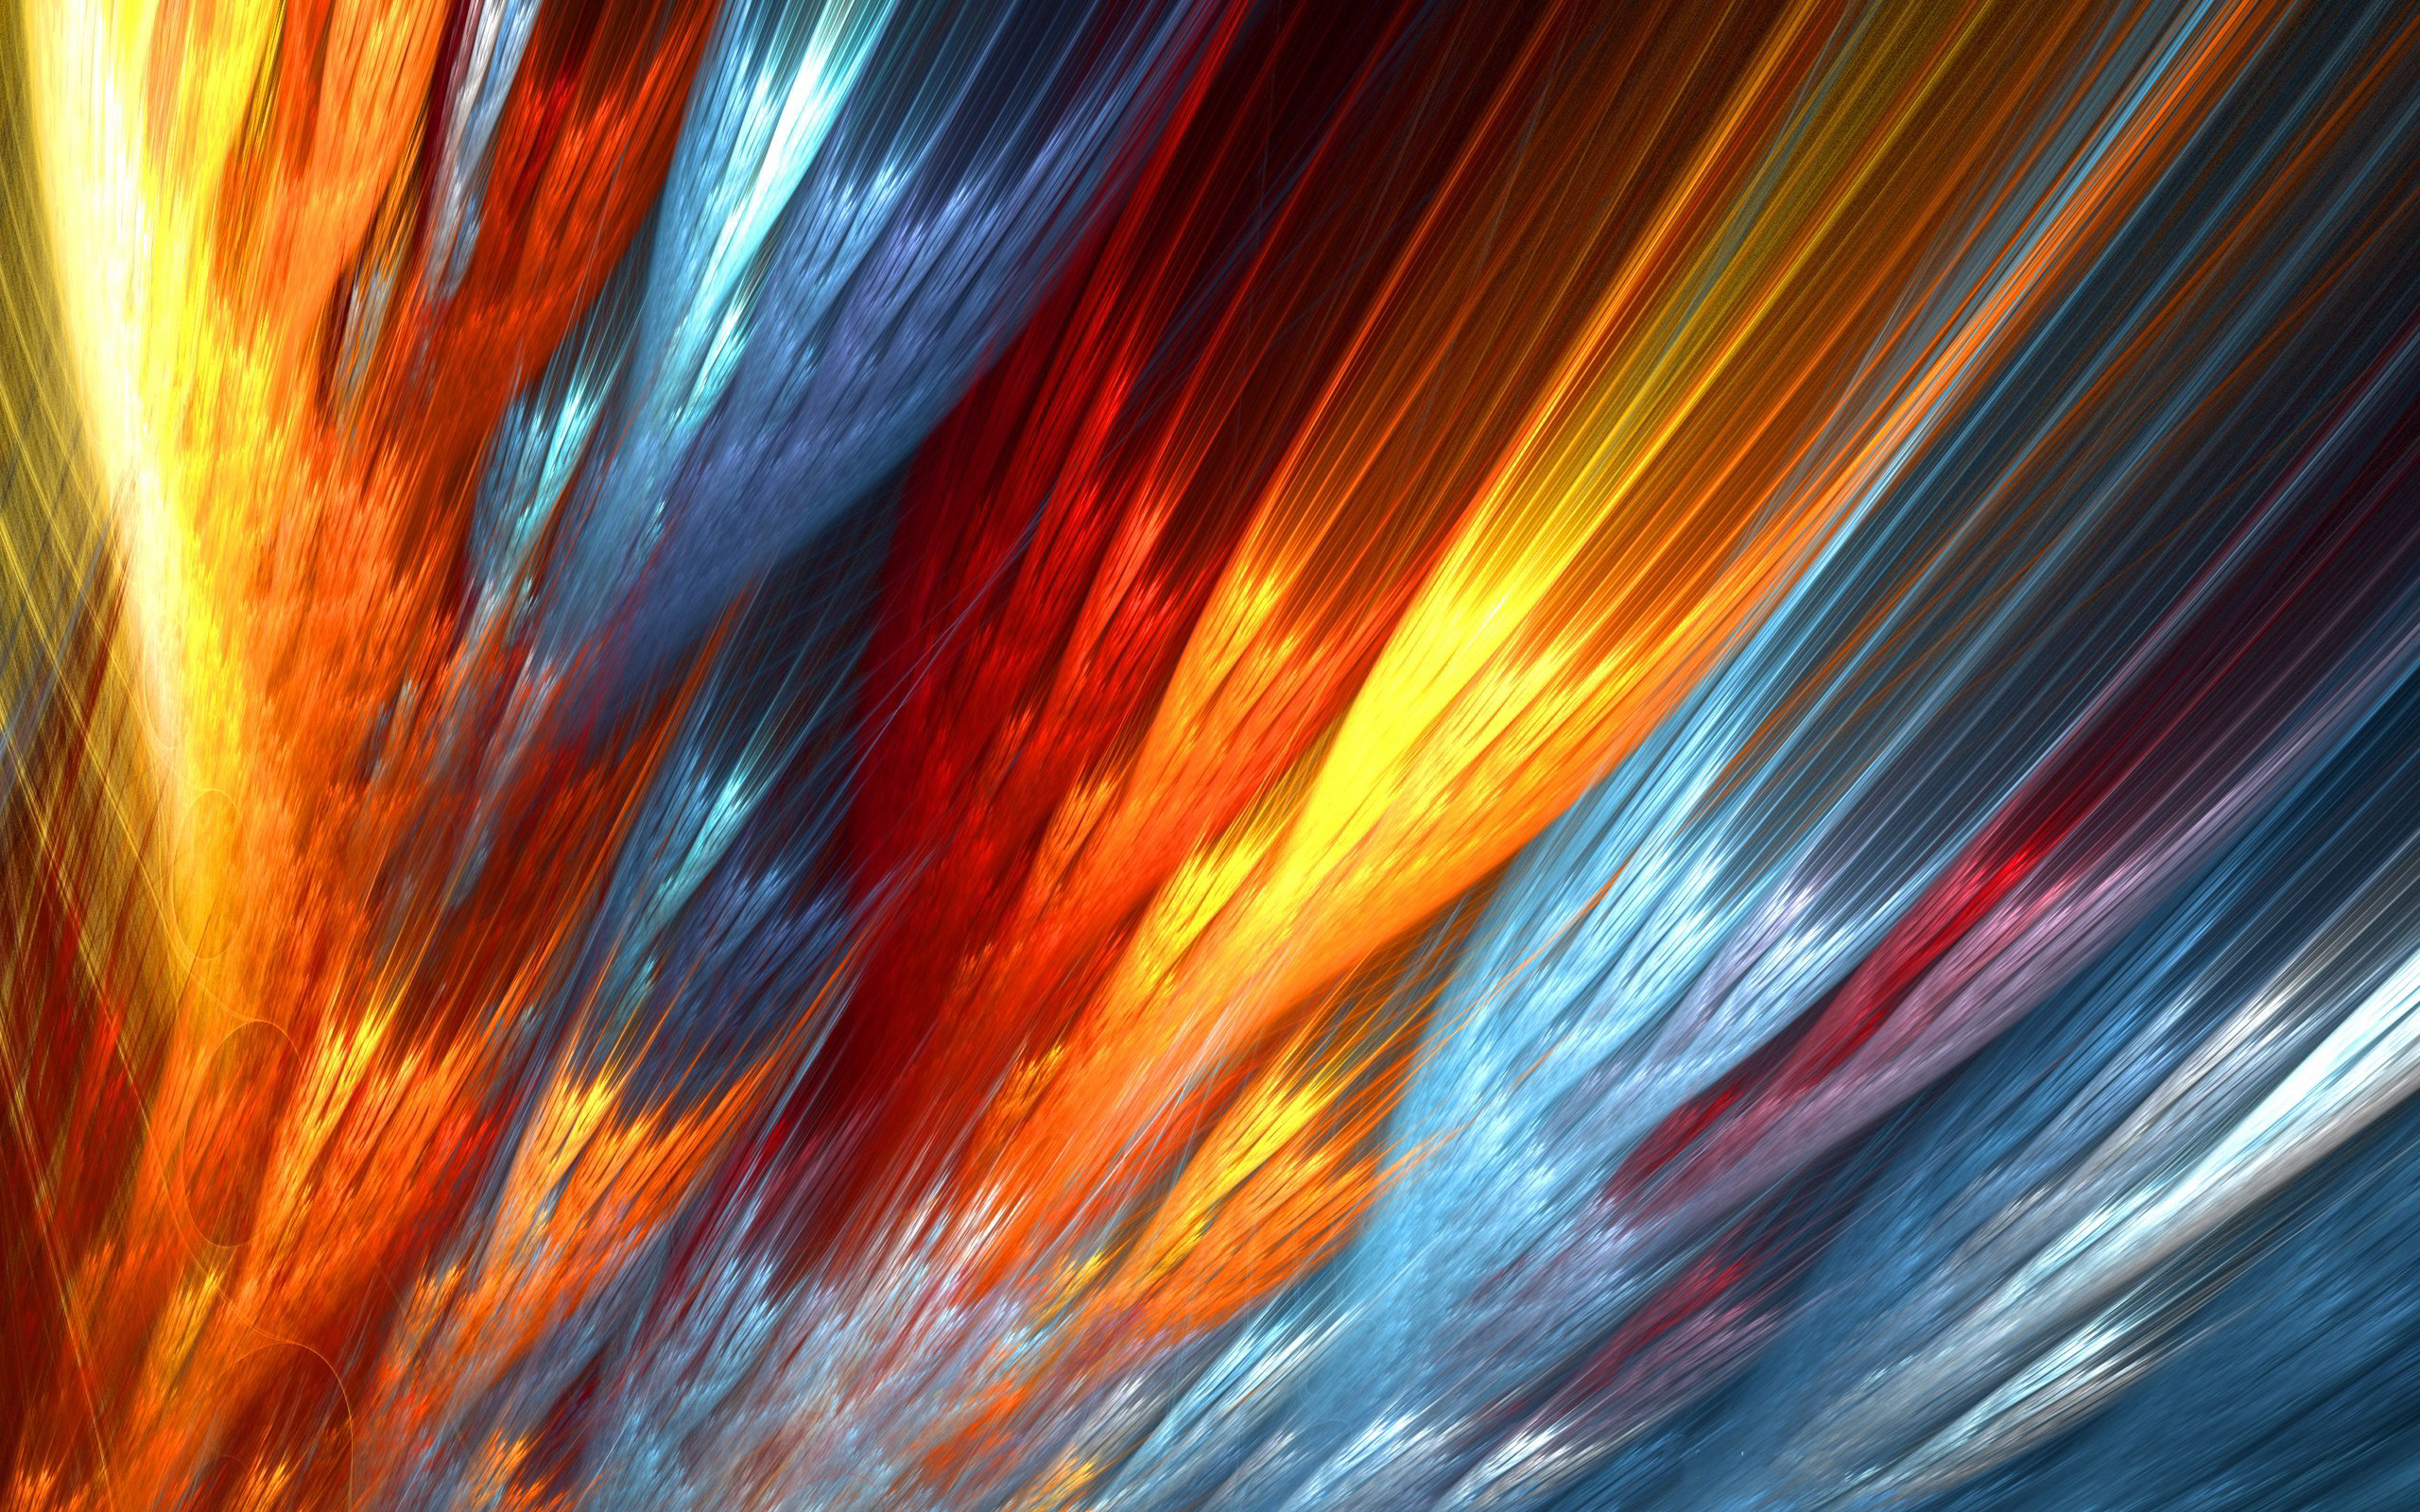 2560x1600 abstract colorful fire wallpapers hd hd desktop wallpapers cool images  amazing hd download apple background wallpapers free display 2560Ã1600 Wallpaper  HD